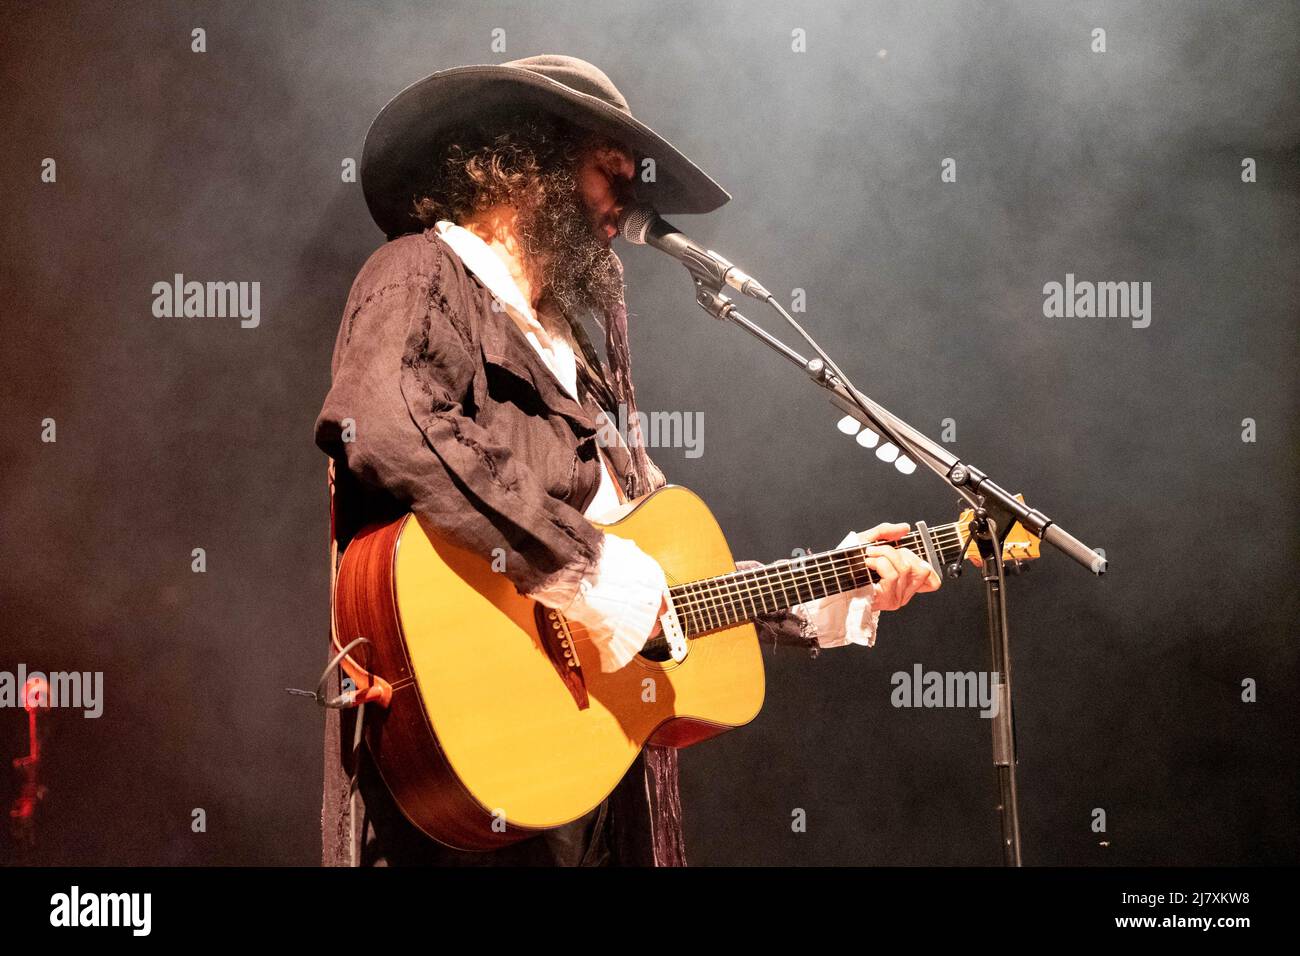 Vinicio Capossela, an Italian sing-song writers and multi-instrumentalist player, performs in Teatro Romano (Verona) at 22 July 2021 for his tour. Stock Photo